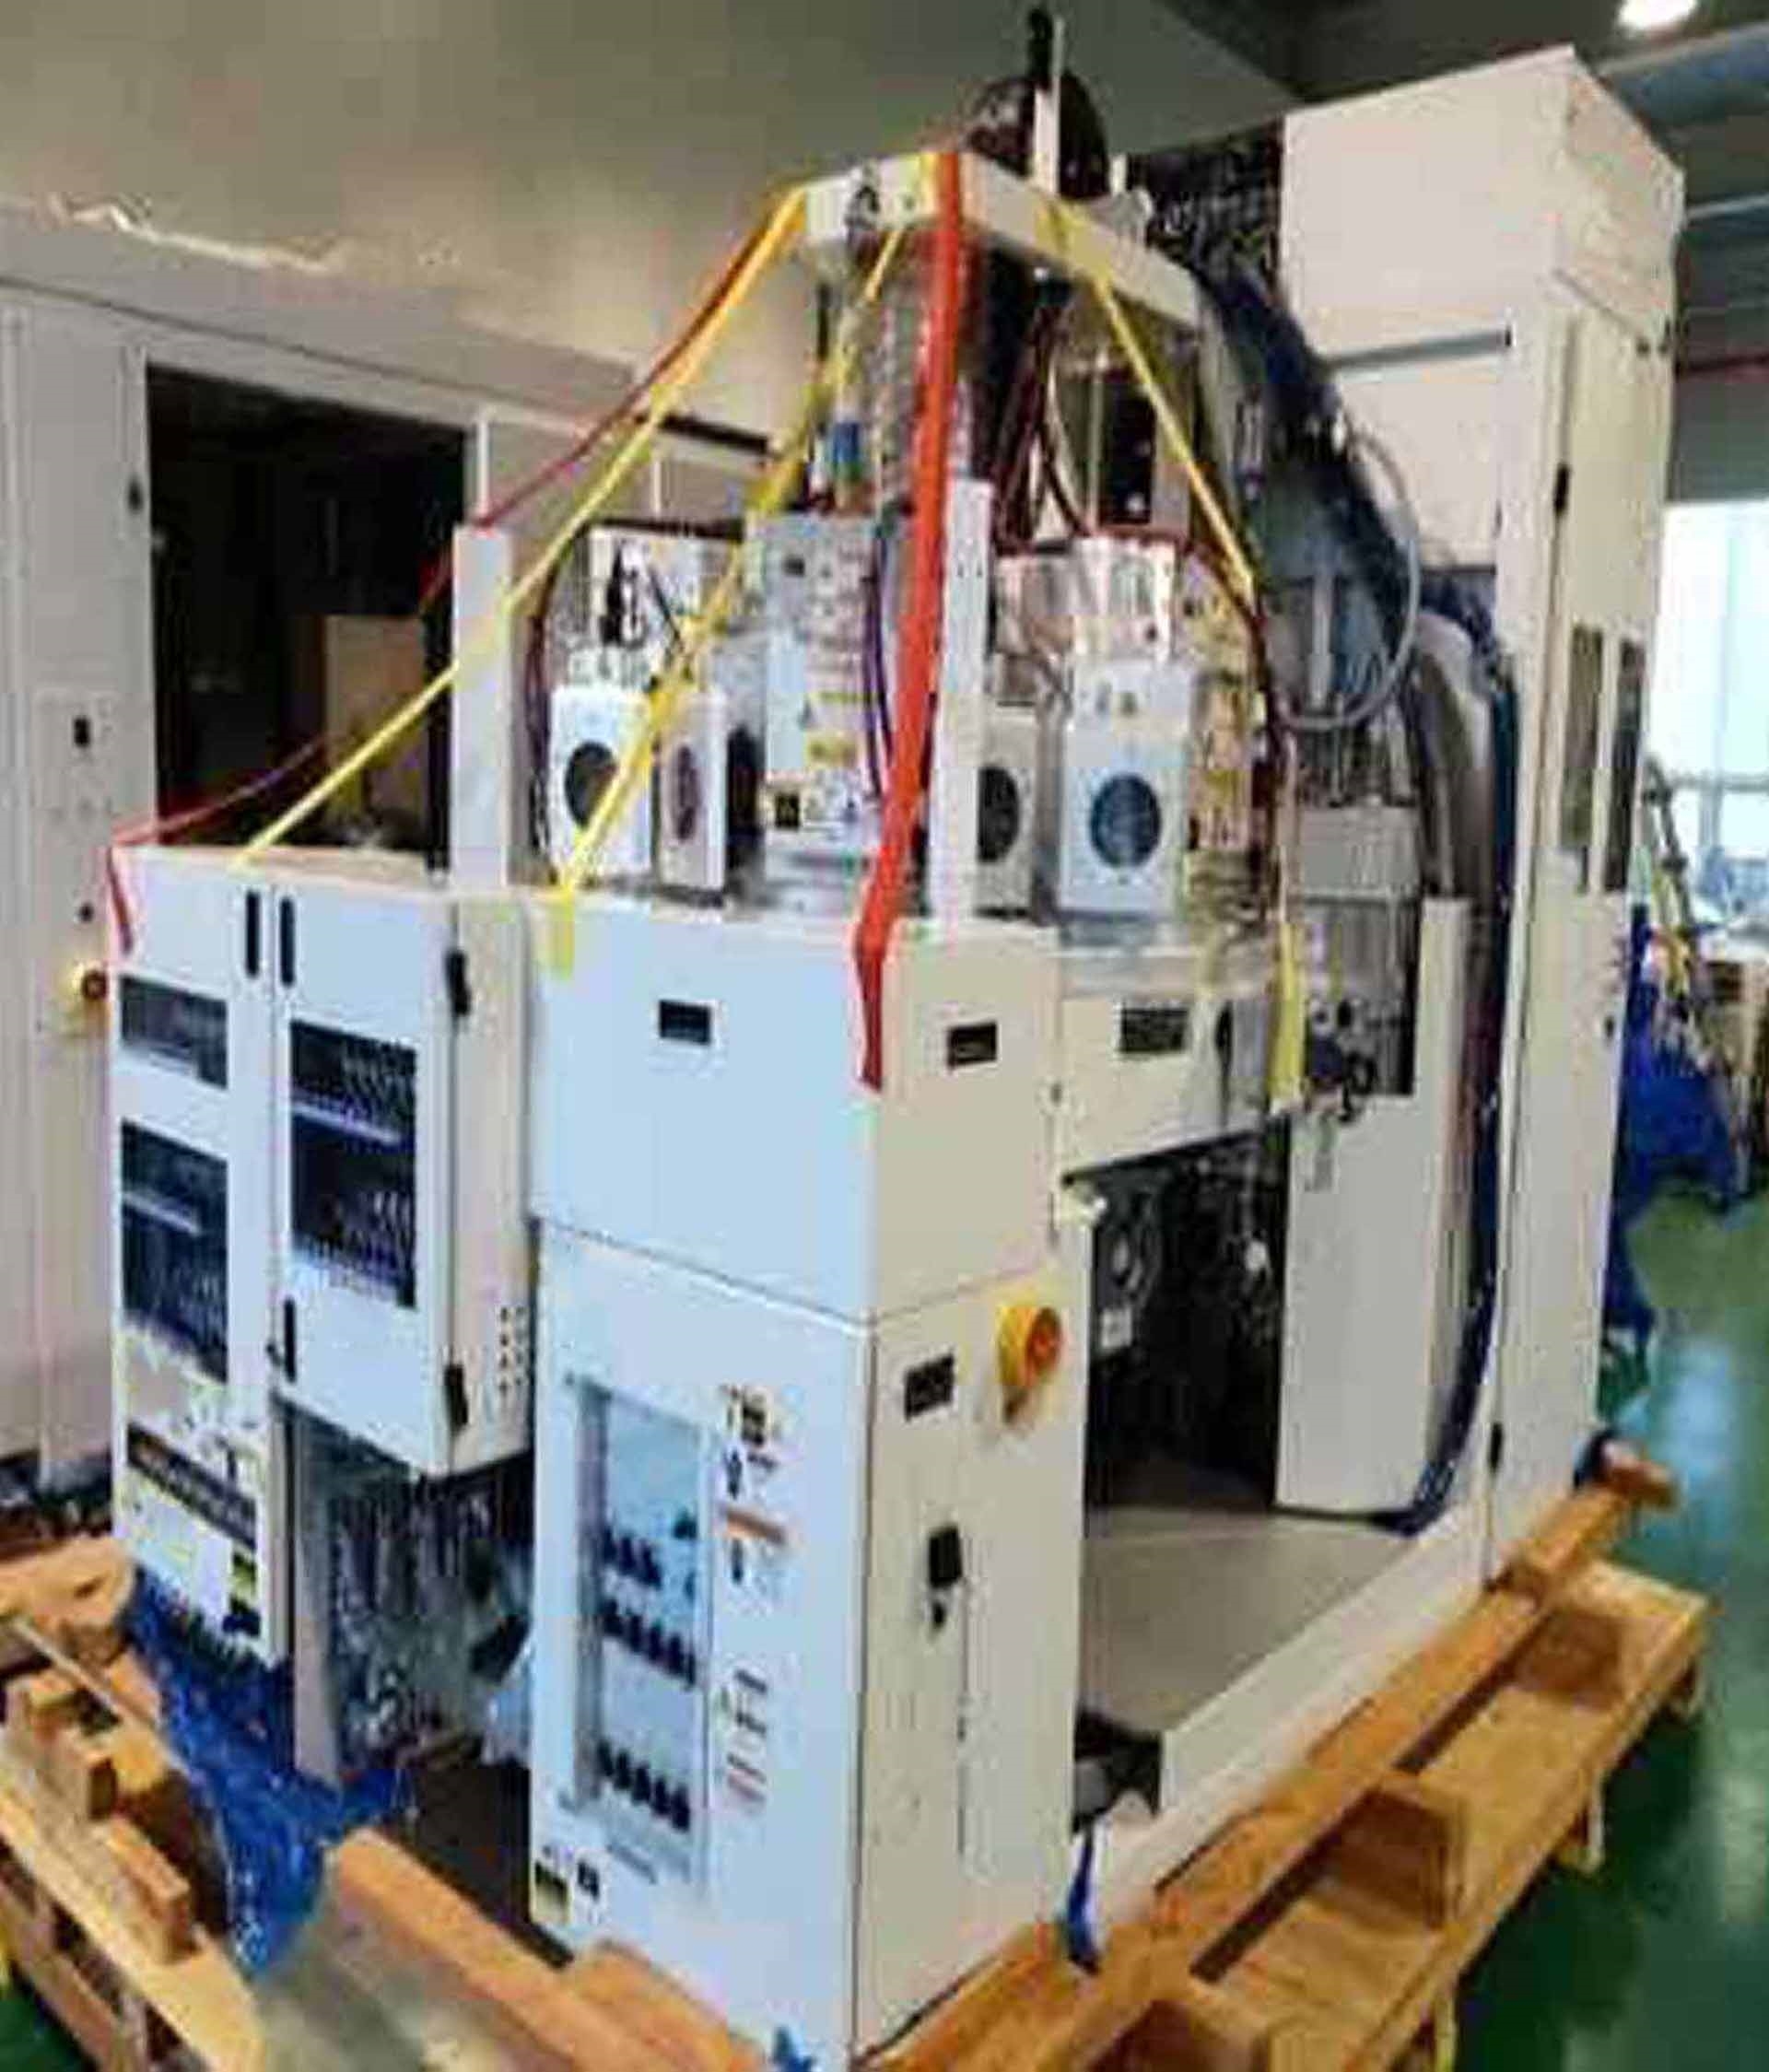 Photo Used SEZ / LAM RESEARCH Gamma GXT For Sale